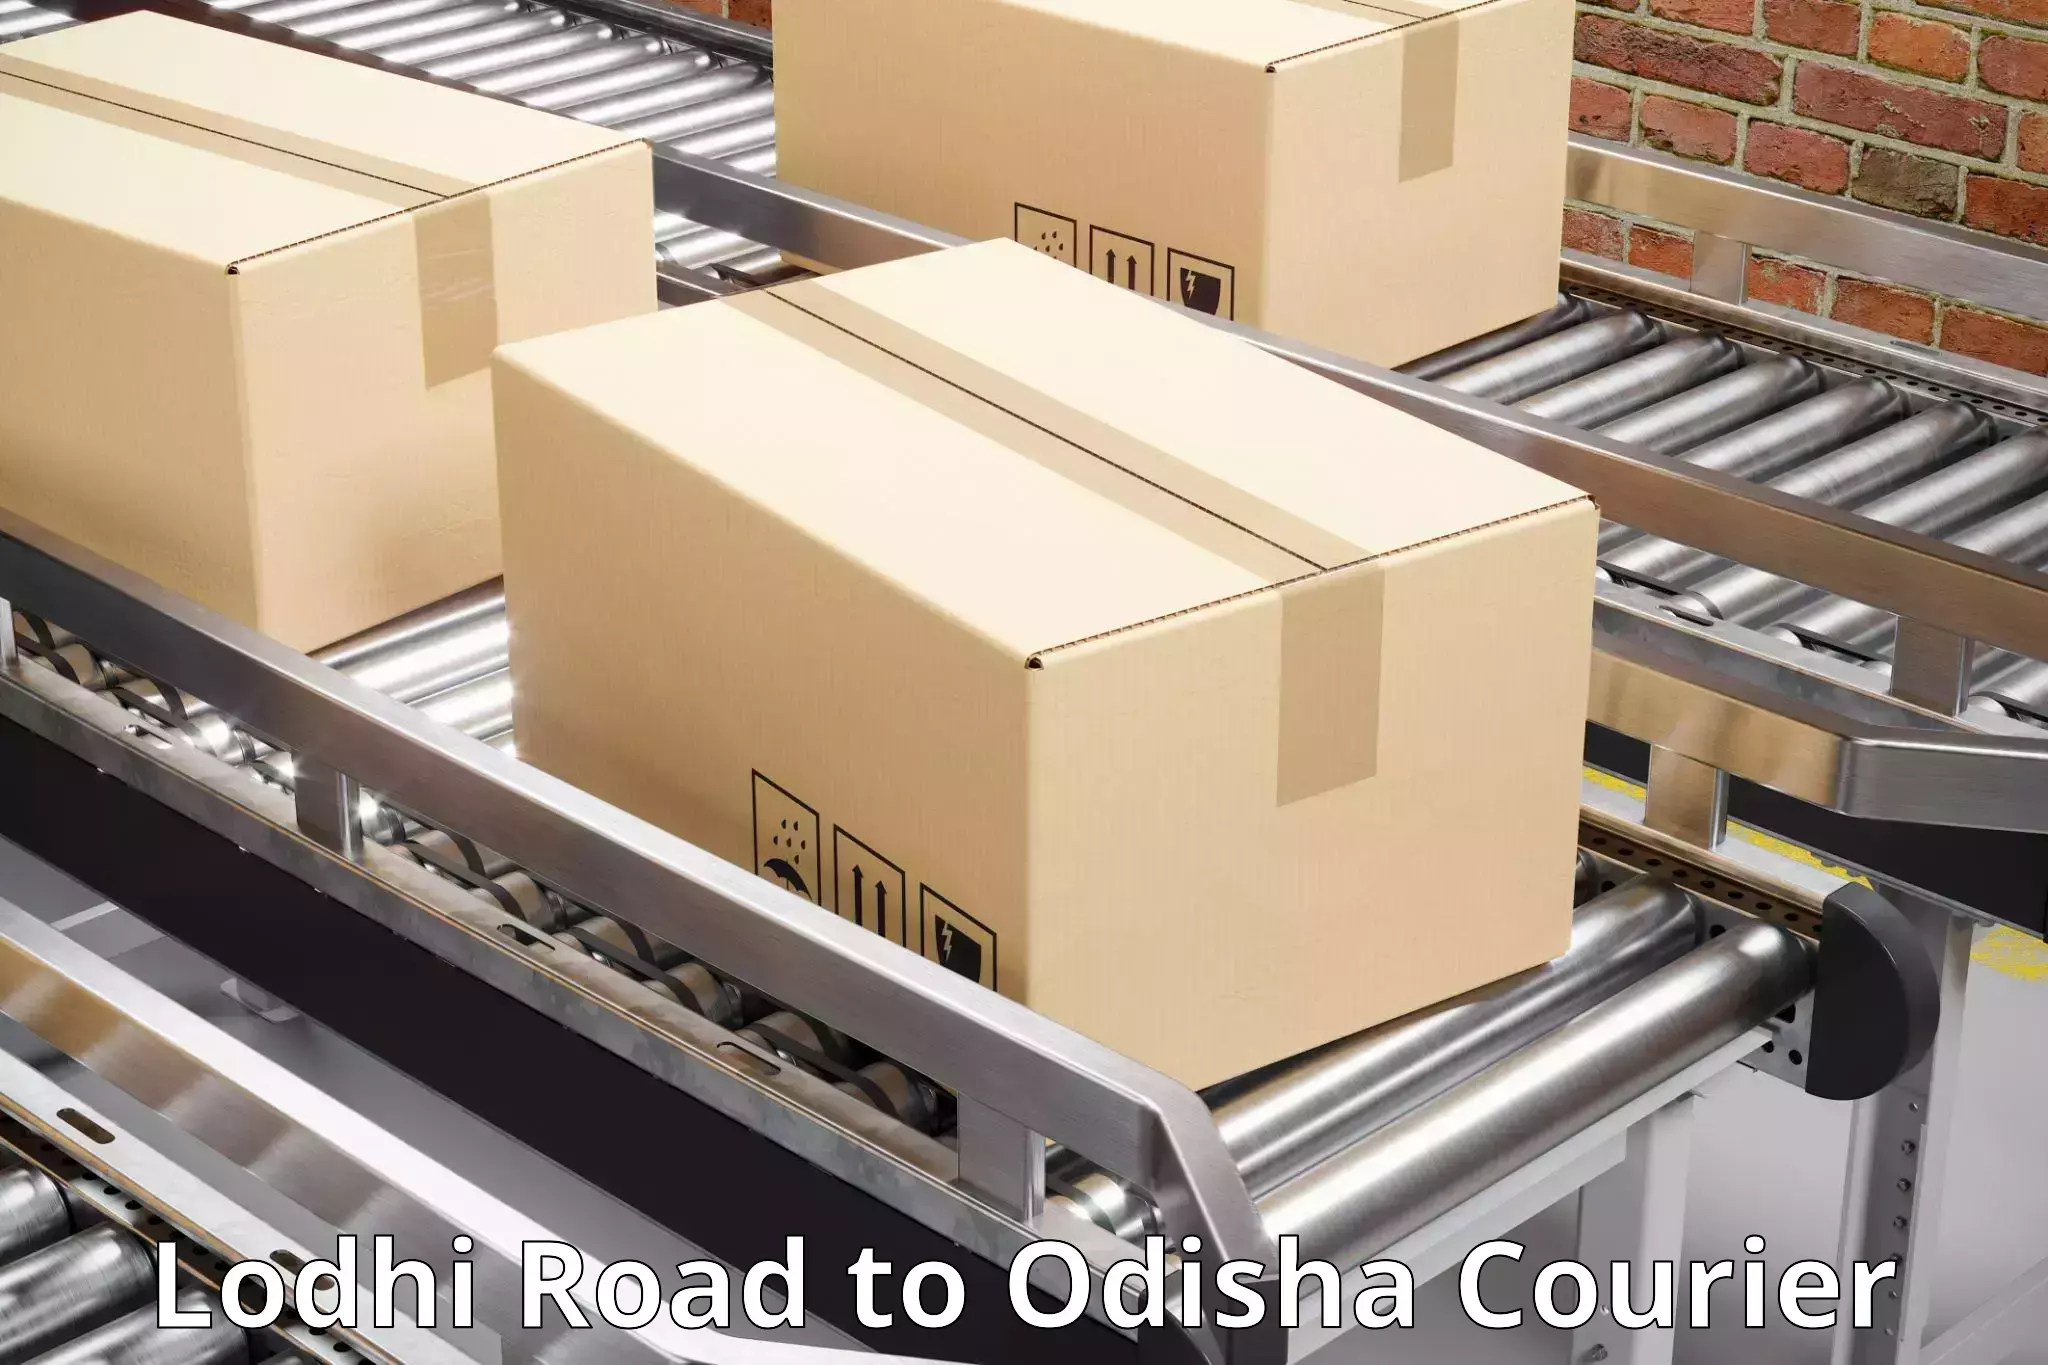 Multi-national courier services Lodhi Road to Bangriposi